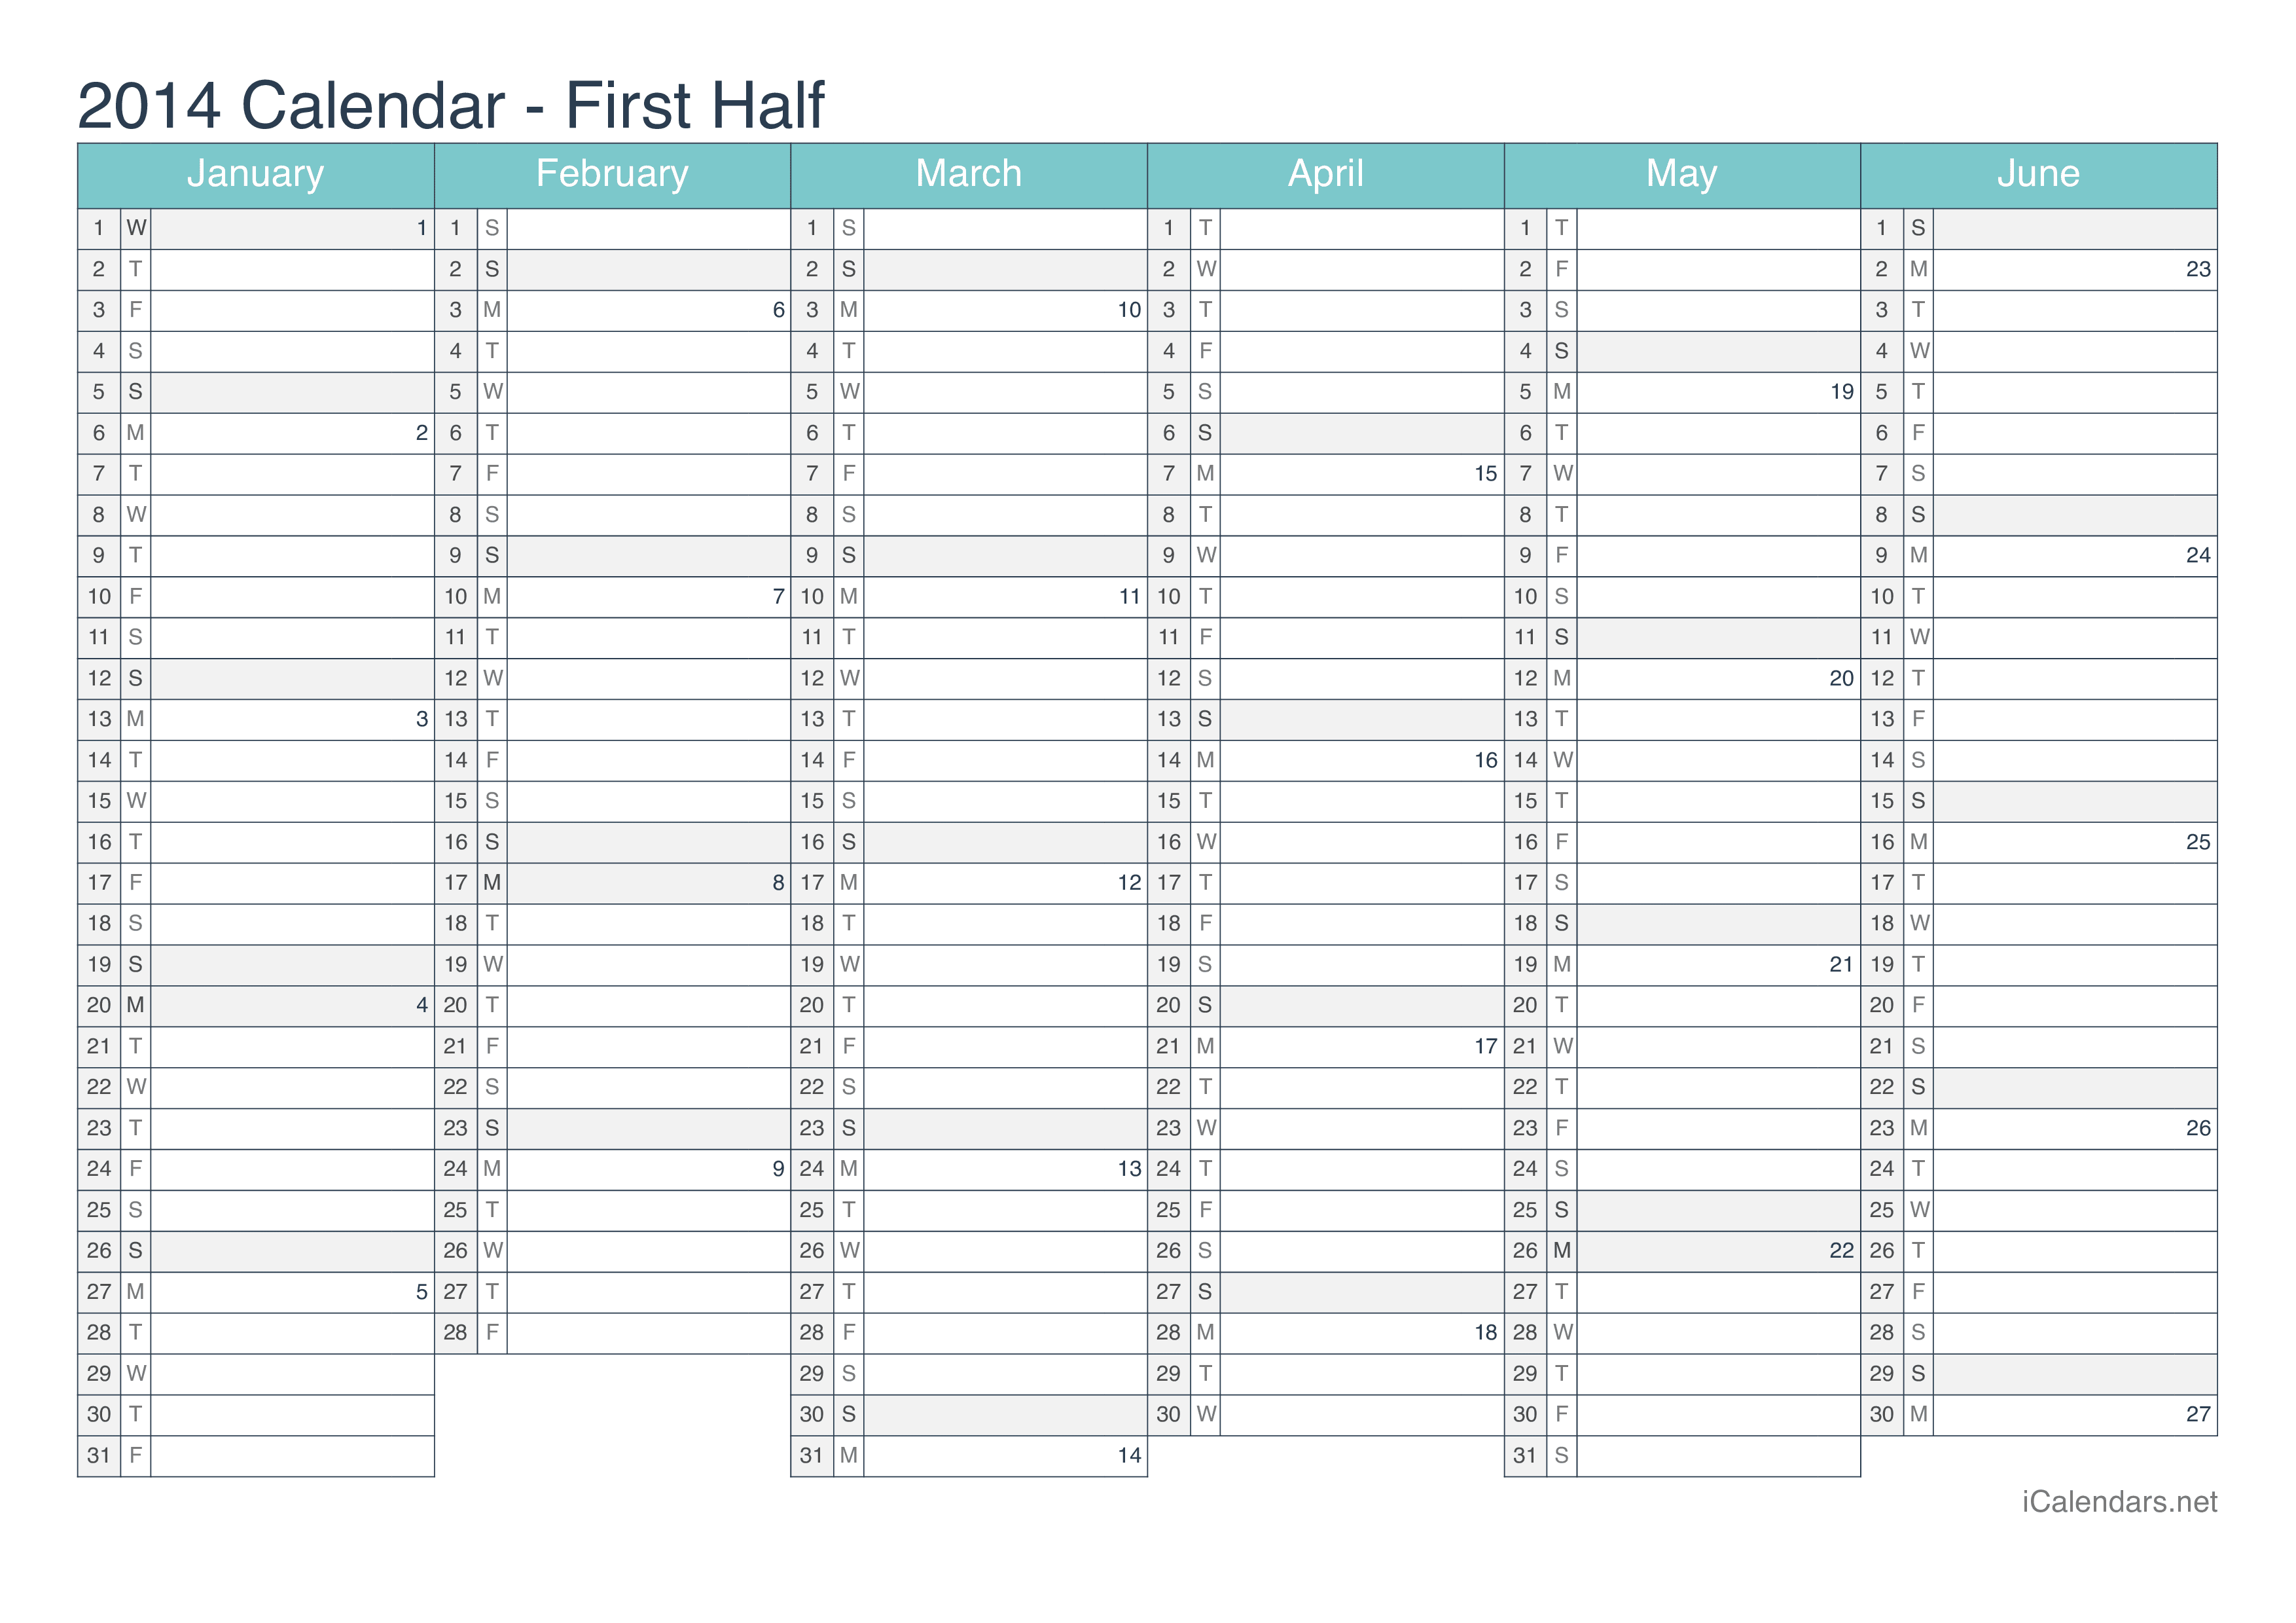 2014 Half year calendar with week numbers - Turquoise